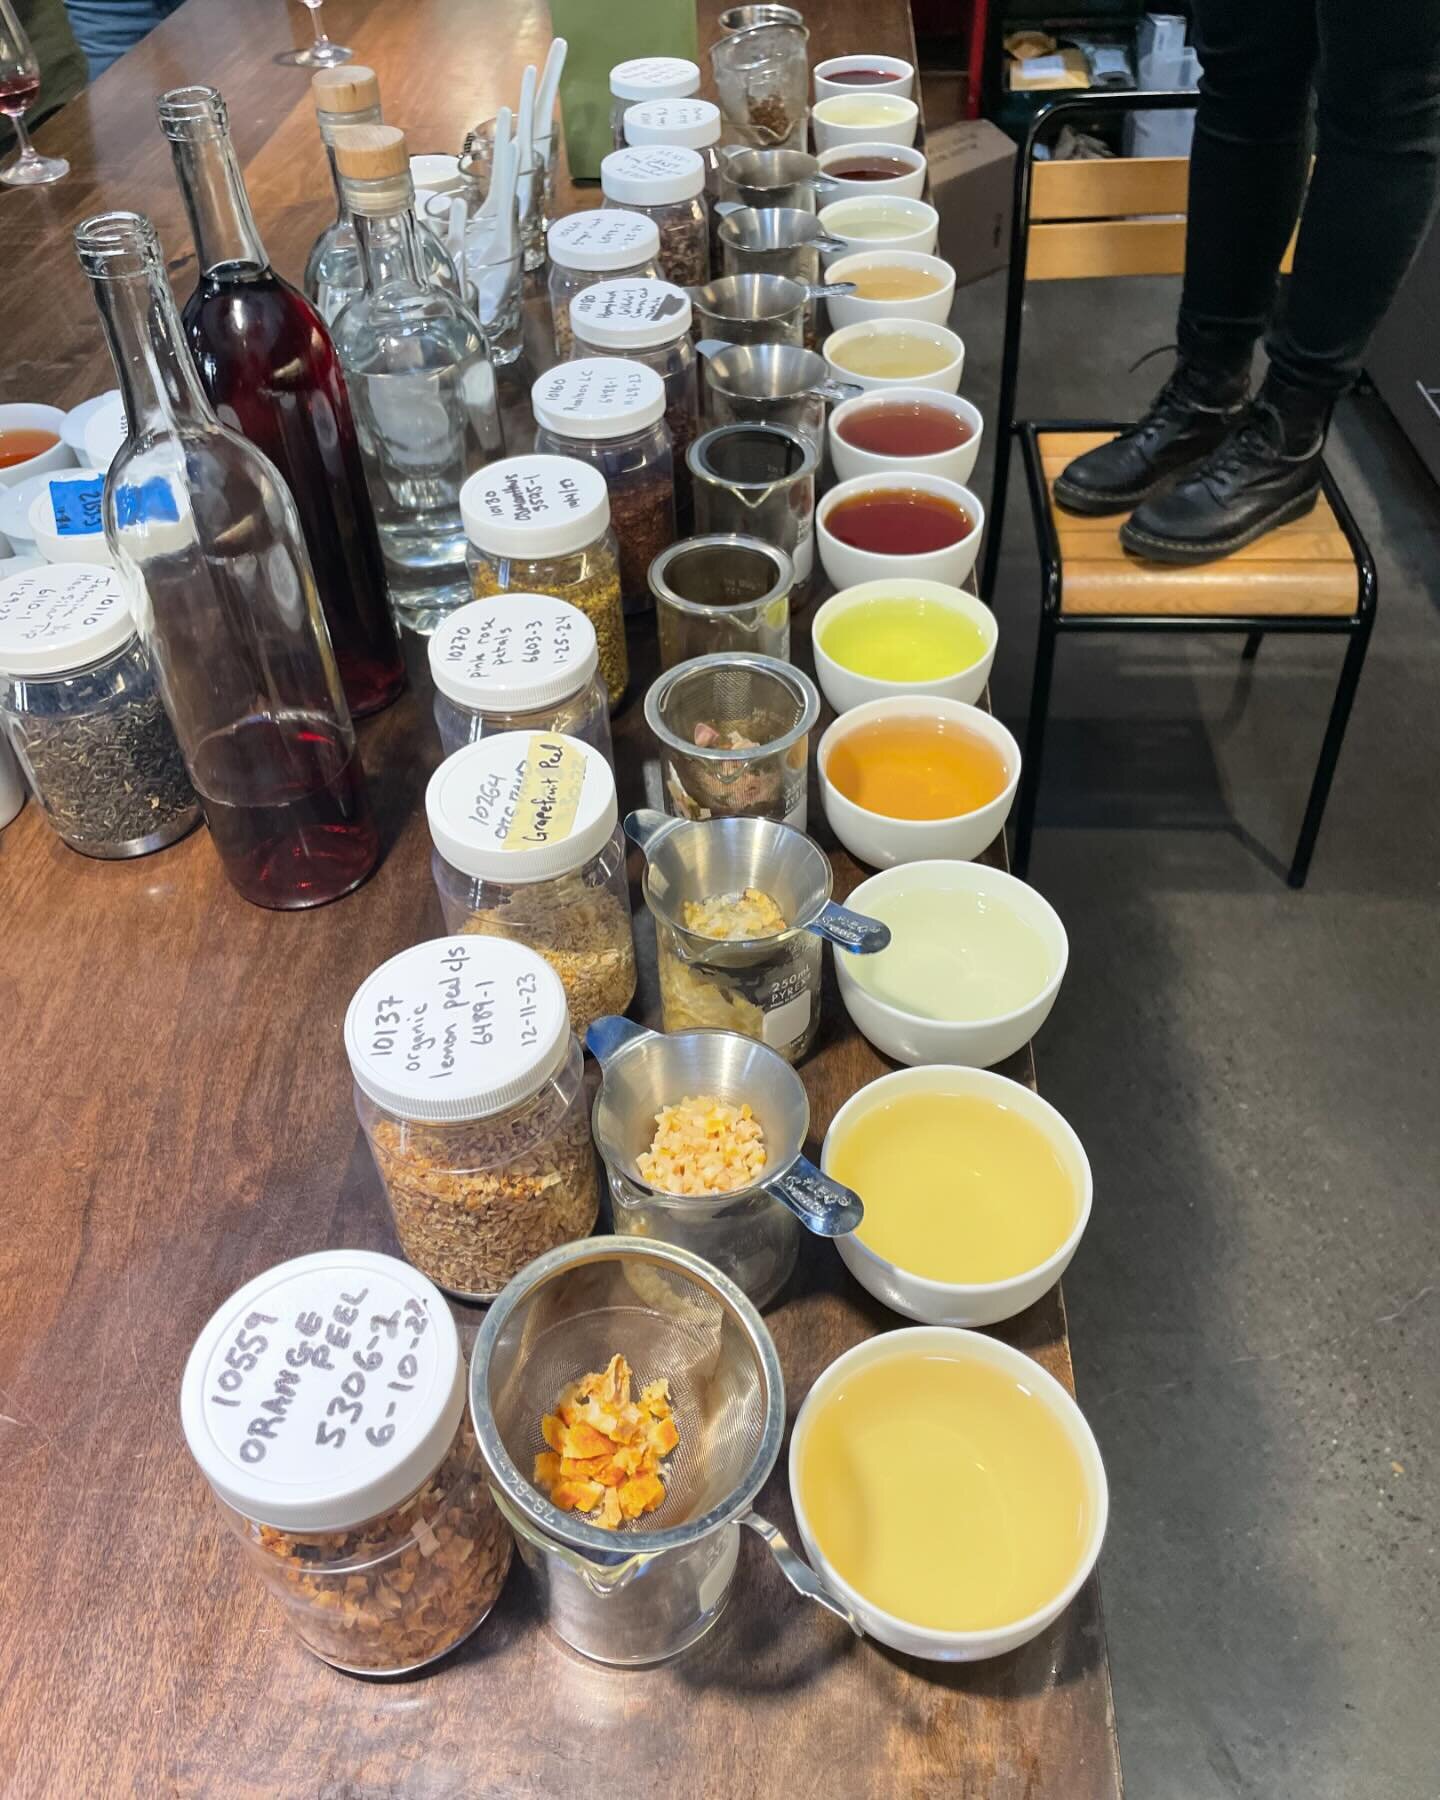 Spent the morning at Smith Tea with blending team crafting a botanical component to Someday Wine&rsquo;s summer vermouth.  Read about it in the June cover story in Oregon Wine Press. #smithteamaker #somedaywine #oregonwinepress #oregonwine